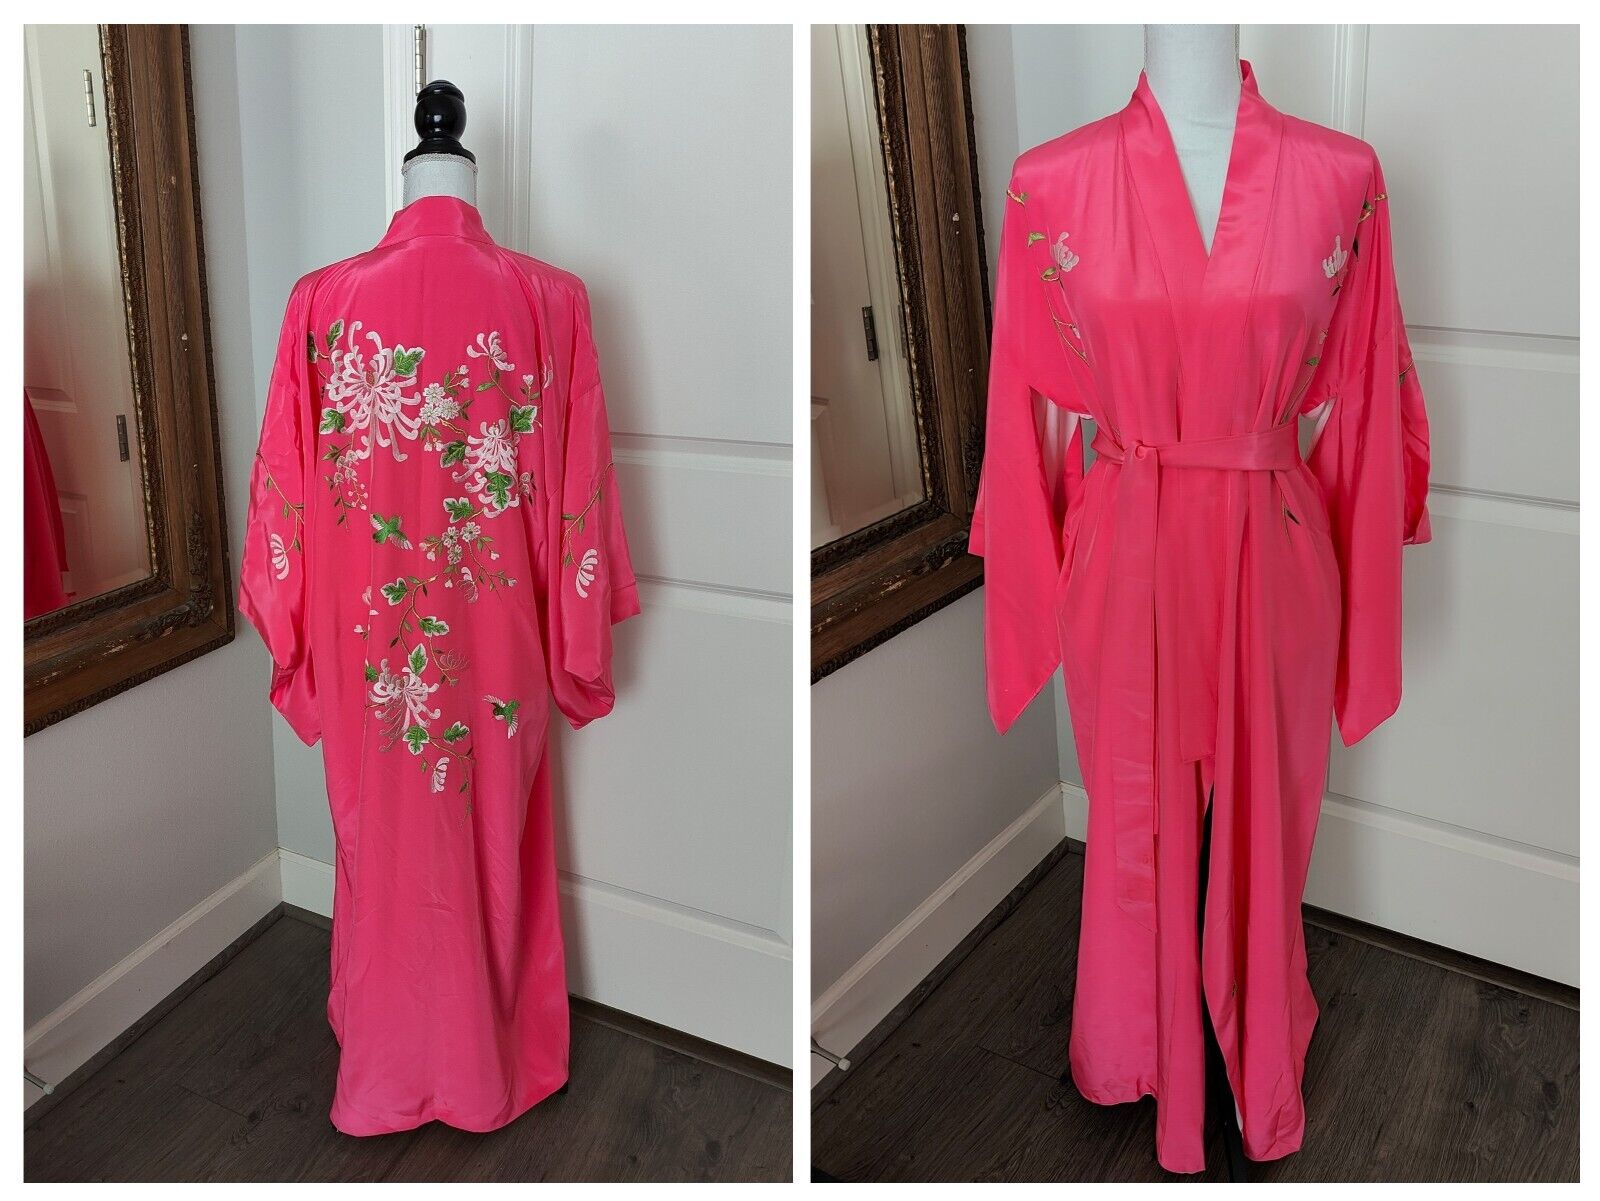 Vintage Kimono Belted Robe Made in Japan Pink Embroidered Mum Floral Birds OSFM